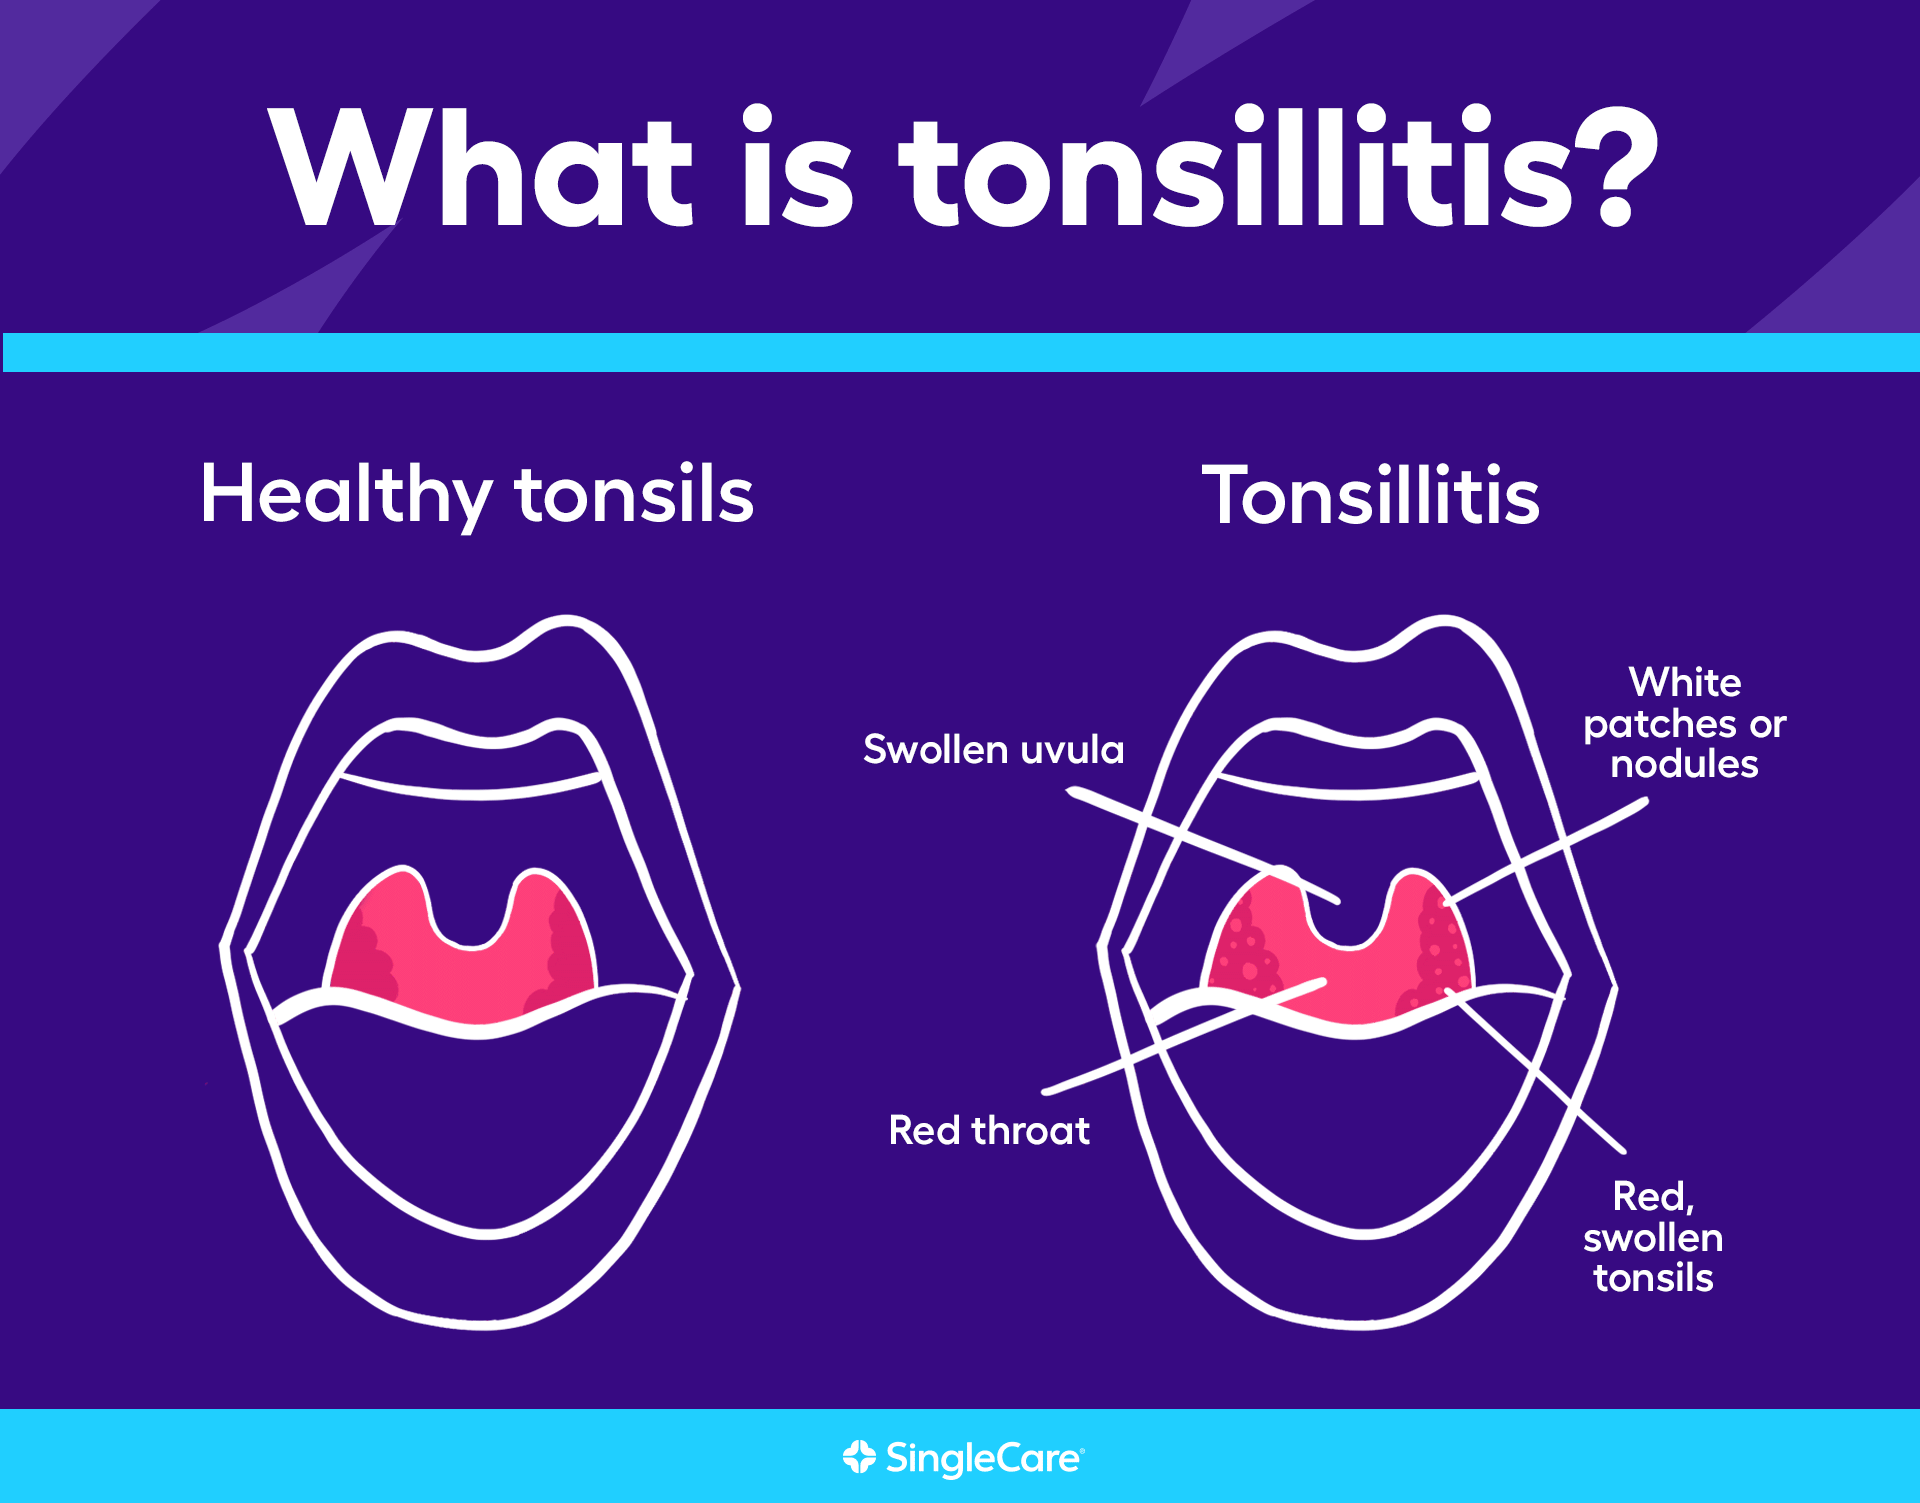 Image of healthy tonsils and tonsils with tonsilitis